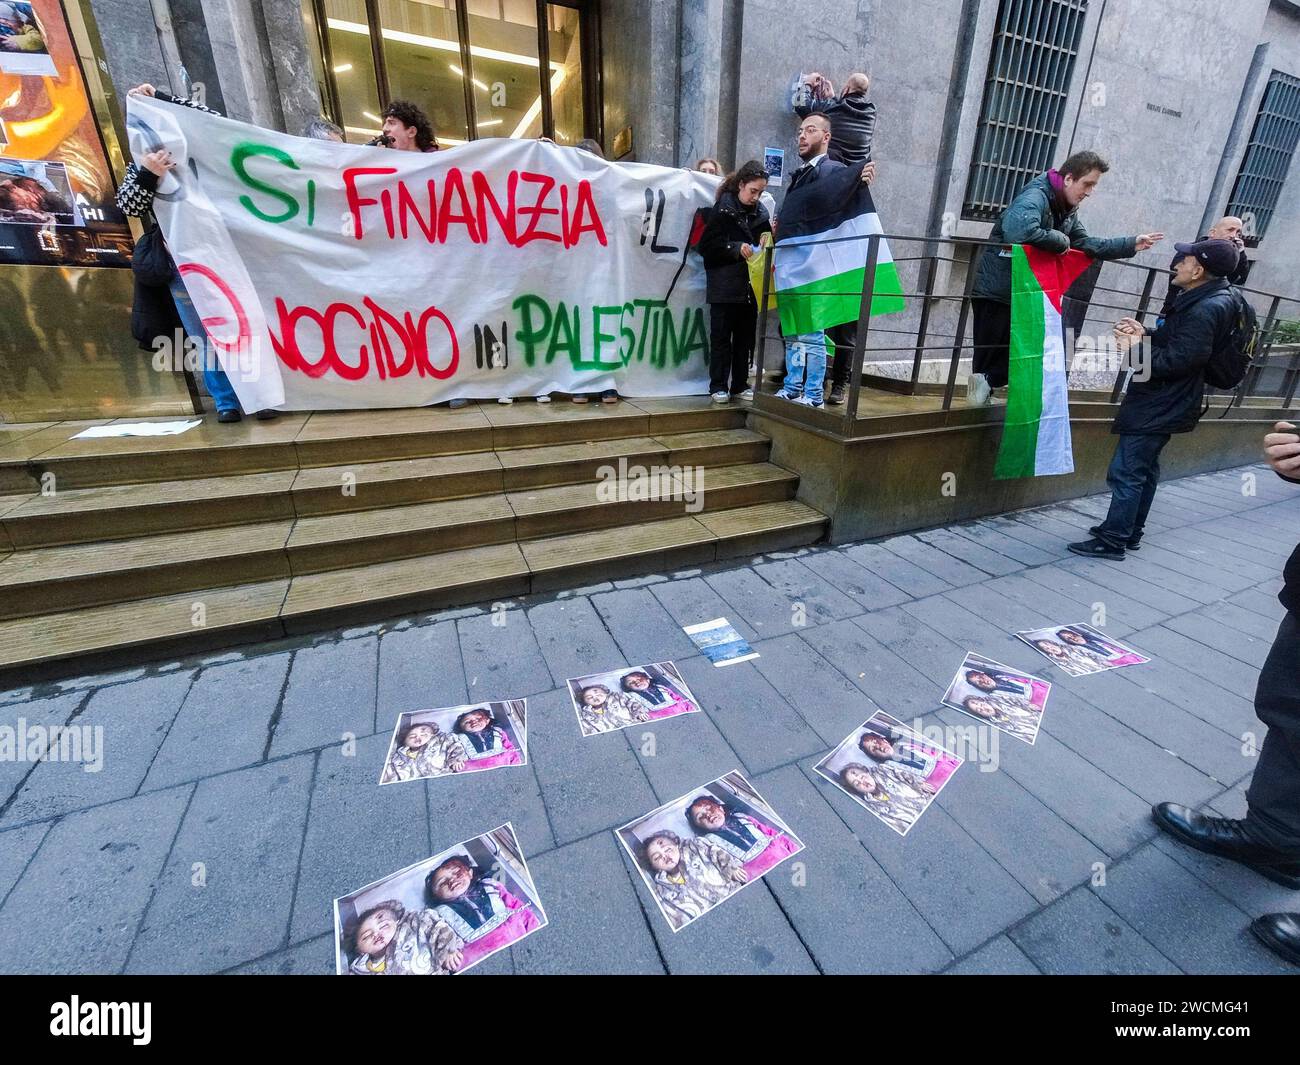 Pro-Palestinian blitz at the Intesa Sanpaolo bank Pro-Palestinian blitz at the Intesa Sanpaolo headquarters in via Toledo. This afternoon, a few dozen activists burst into the intesa san paolo bank building, chanting chants and slogans for the people of Gaza. Here the genocide in Palestine is being financed reads a large banner unfurled in front of the bank, papered by the protesters with leaflets depicting the macabre images of children who died under bombing in the Middle East. DJI 0717 Copyright: xAntonioxBalascox Stock Photo